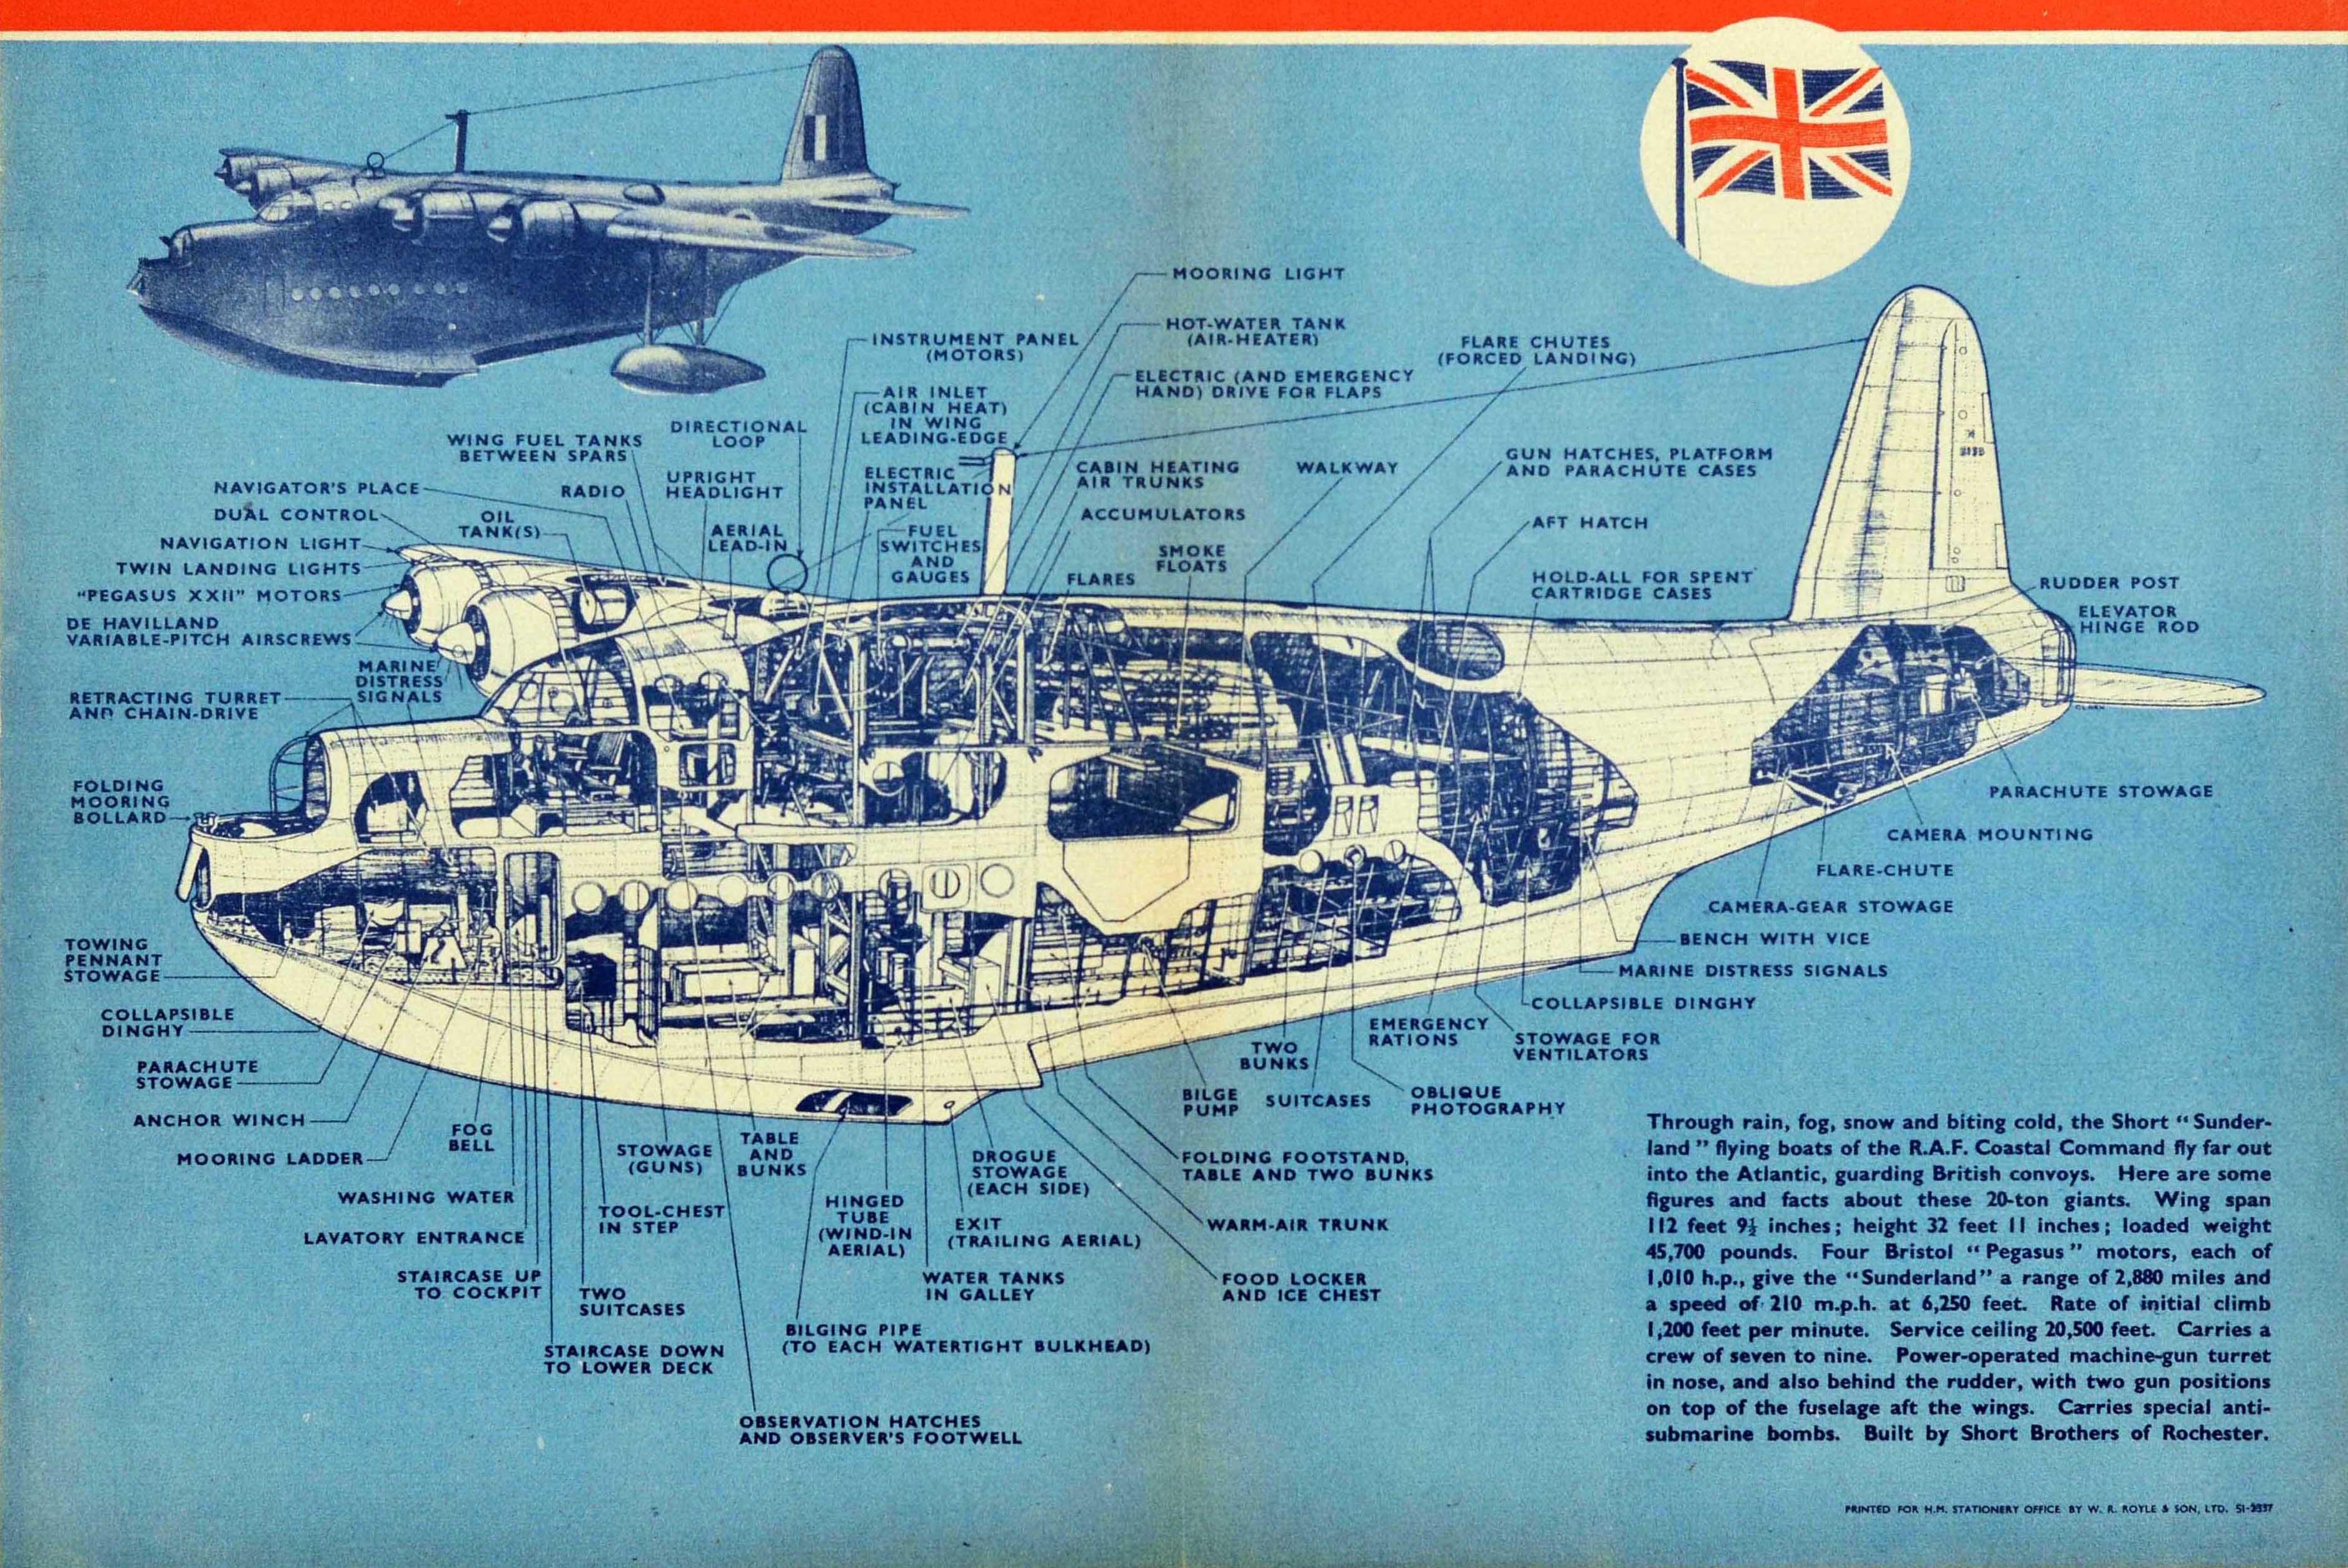 Original vintage World War Two poster for the 20-Ton Giant Of The Coastal Command - A Short Sunderland Flying Boat featuring an annotated technical cut-out design of the aircraft showing the details inside and outside with a Union Jack flag below